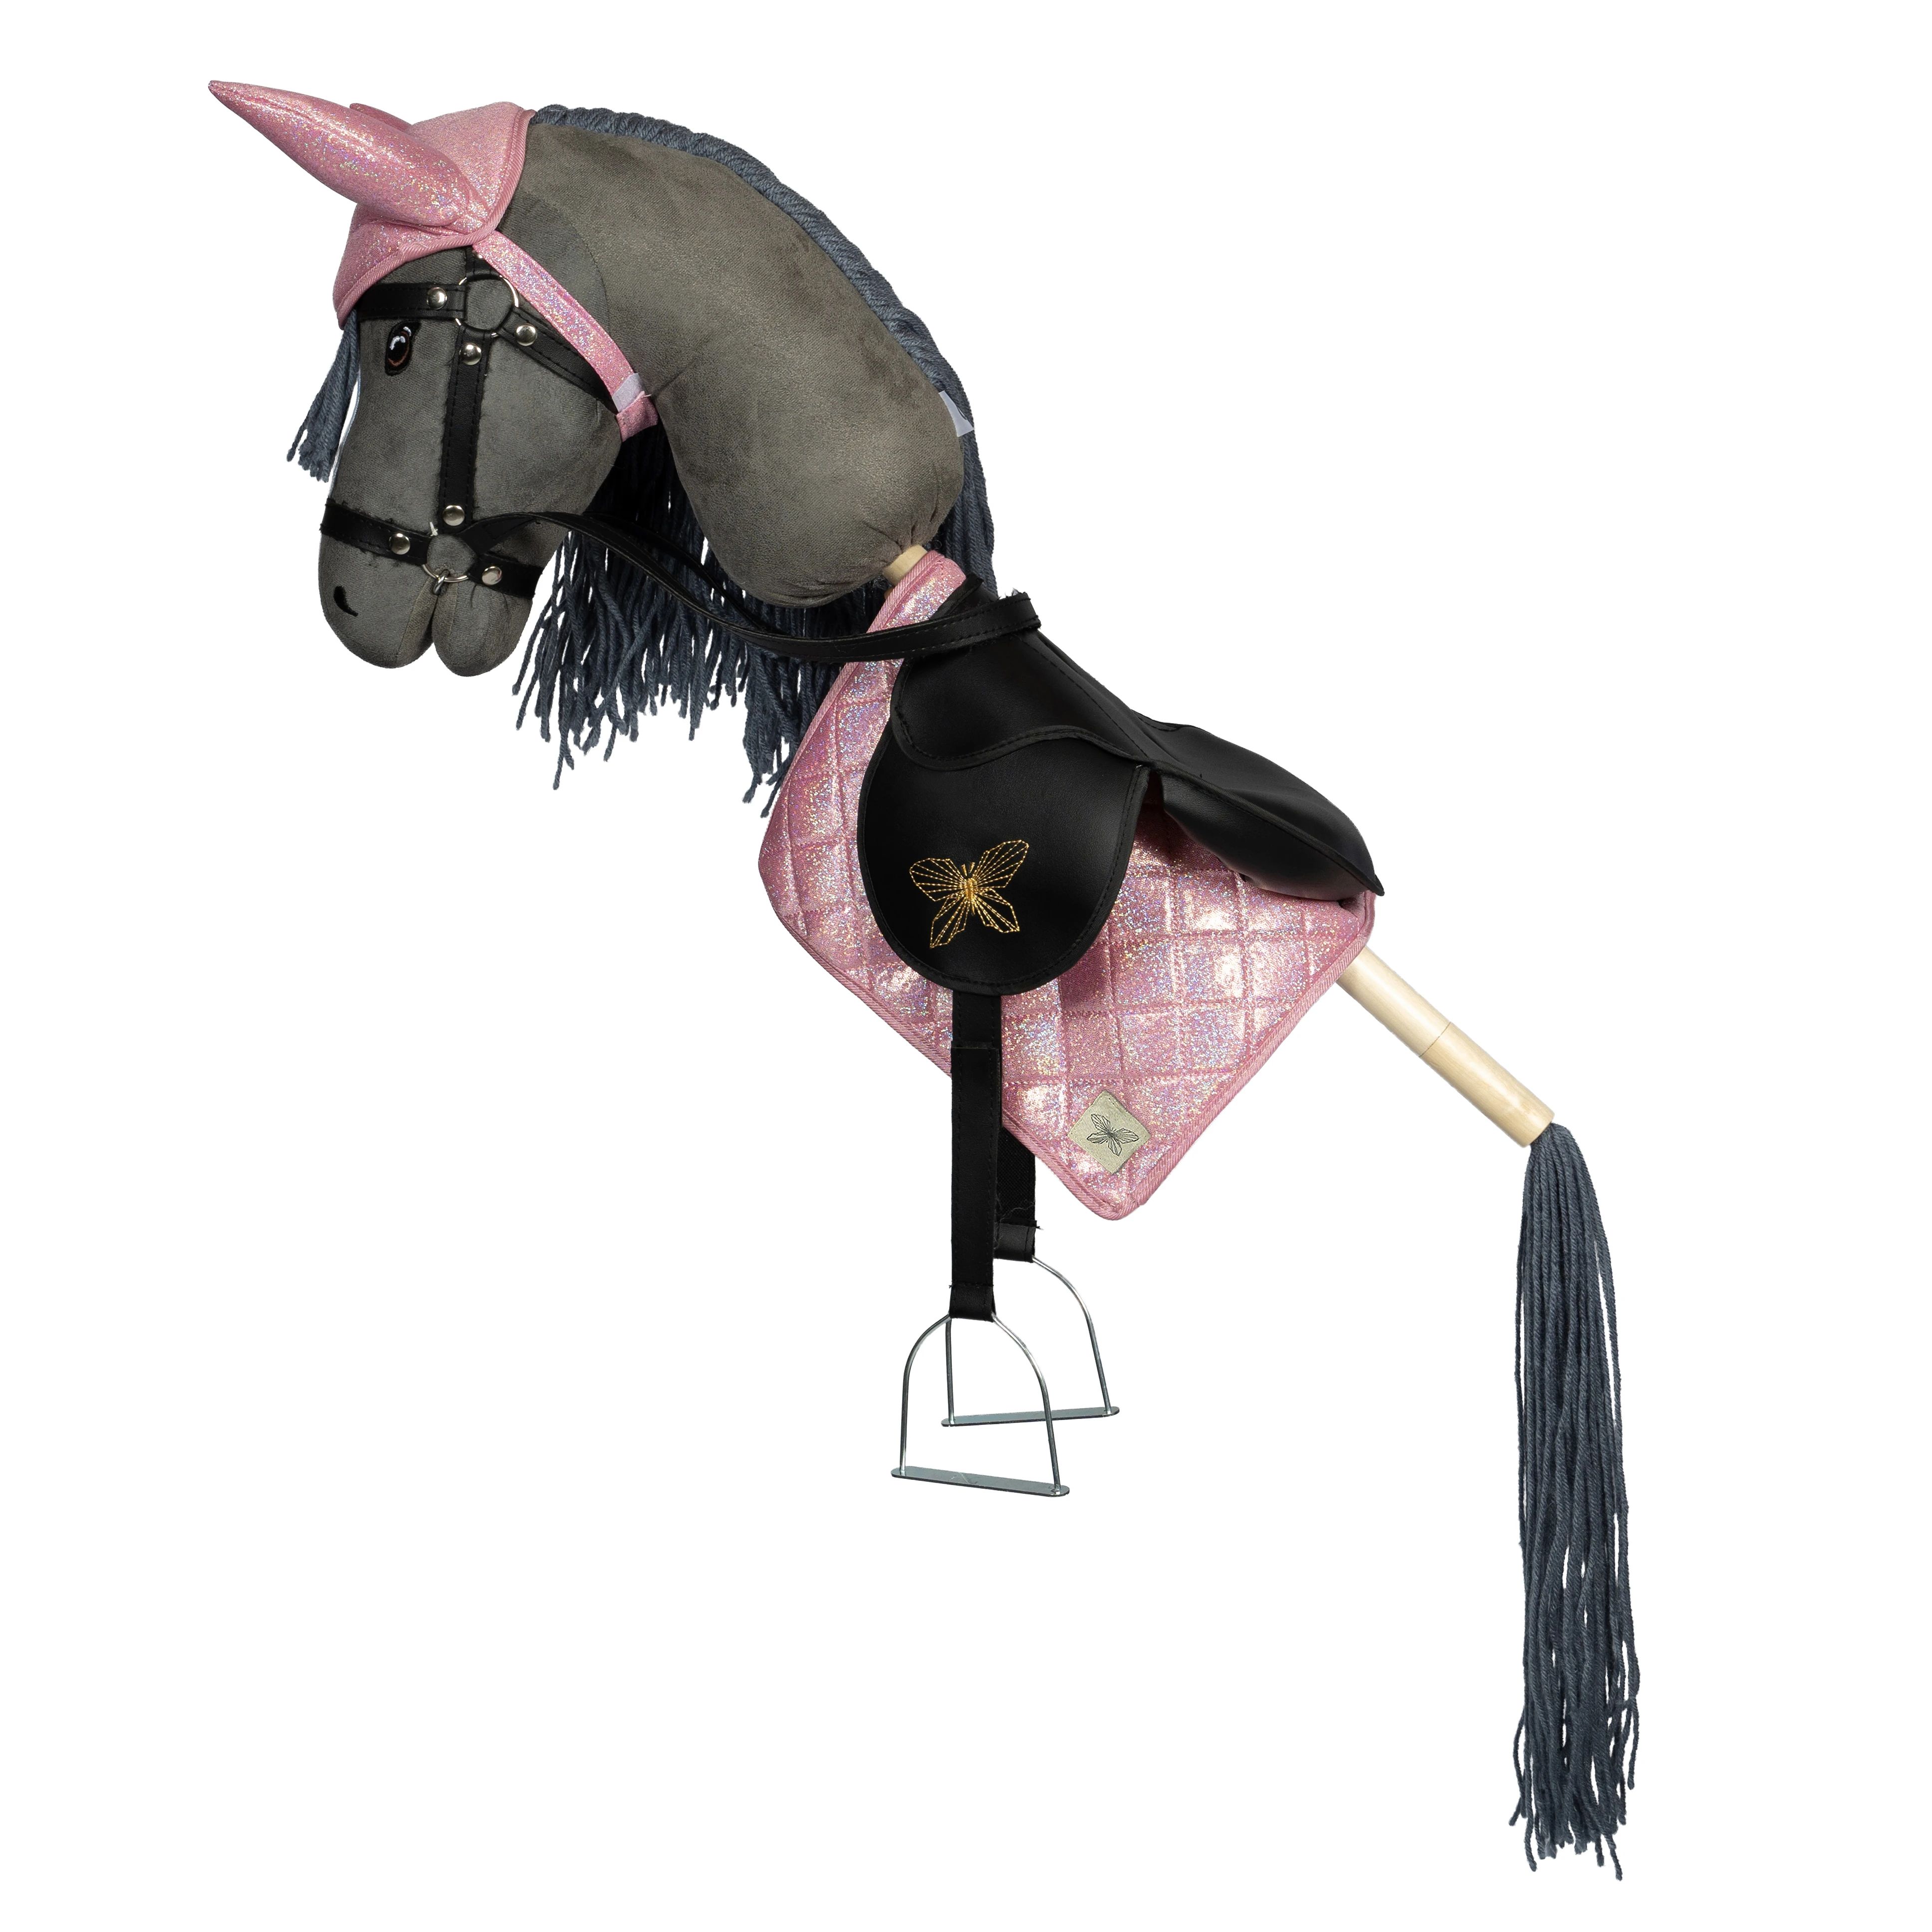 Hobby Horse Photos and Images